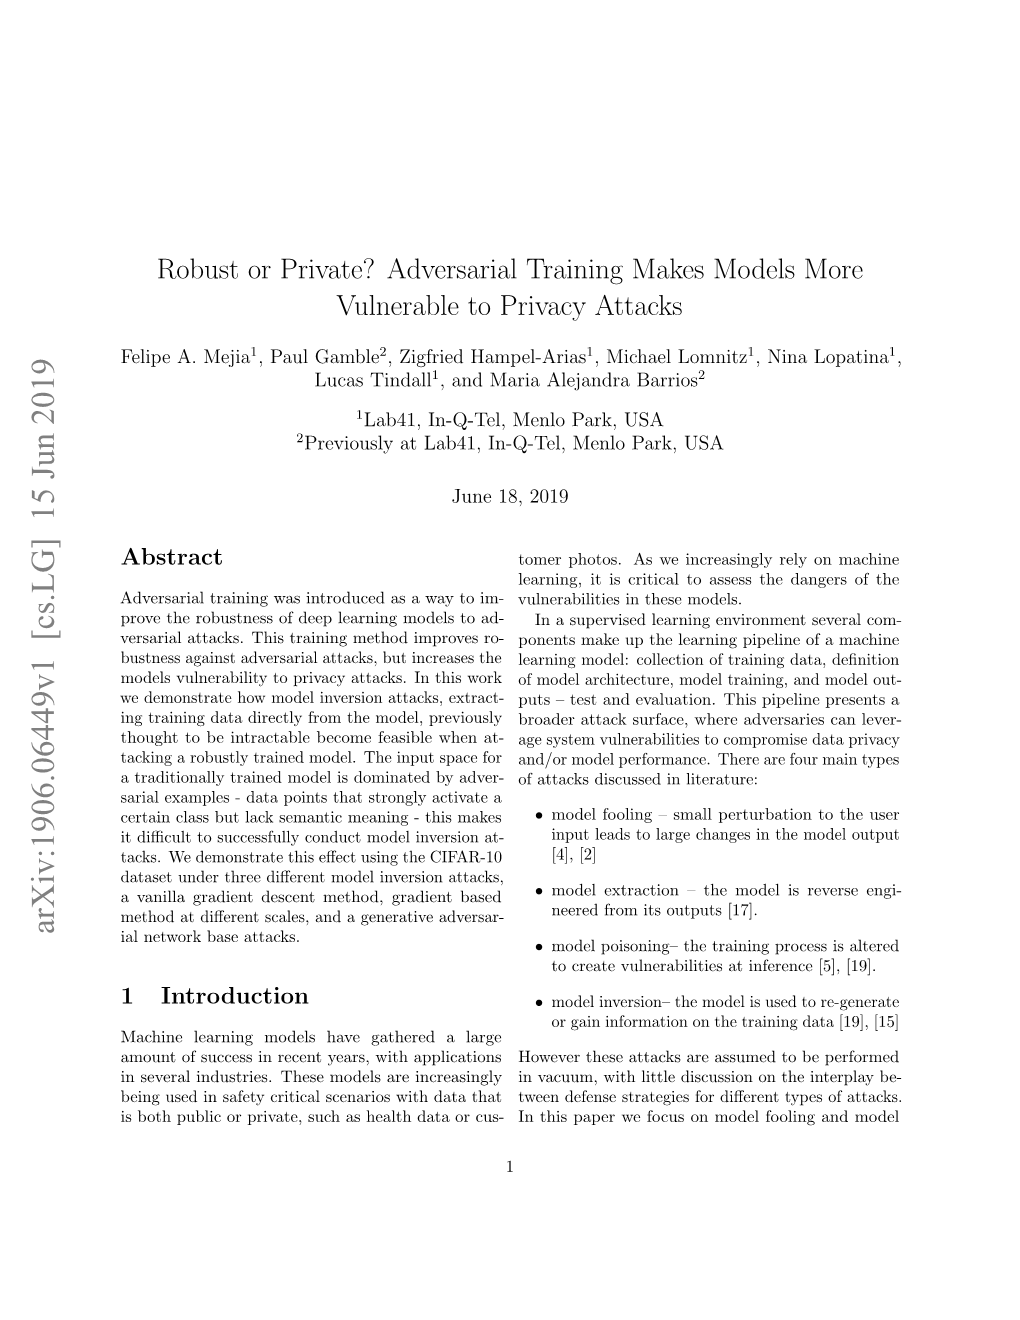 Robust Or Private? Adversarial Training Makes Models More Vulnerable to Privacy Attacks